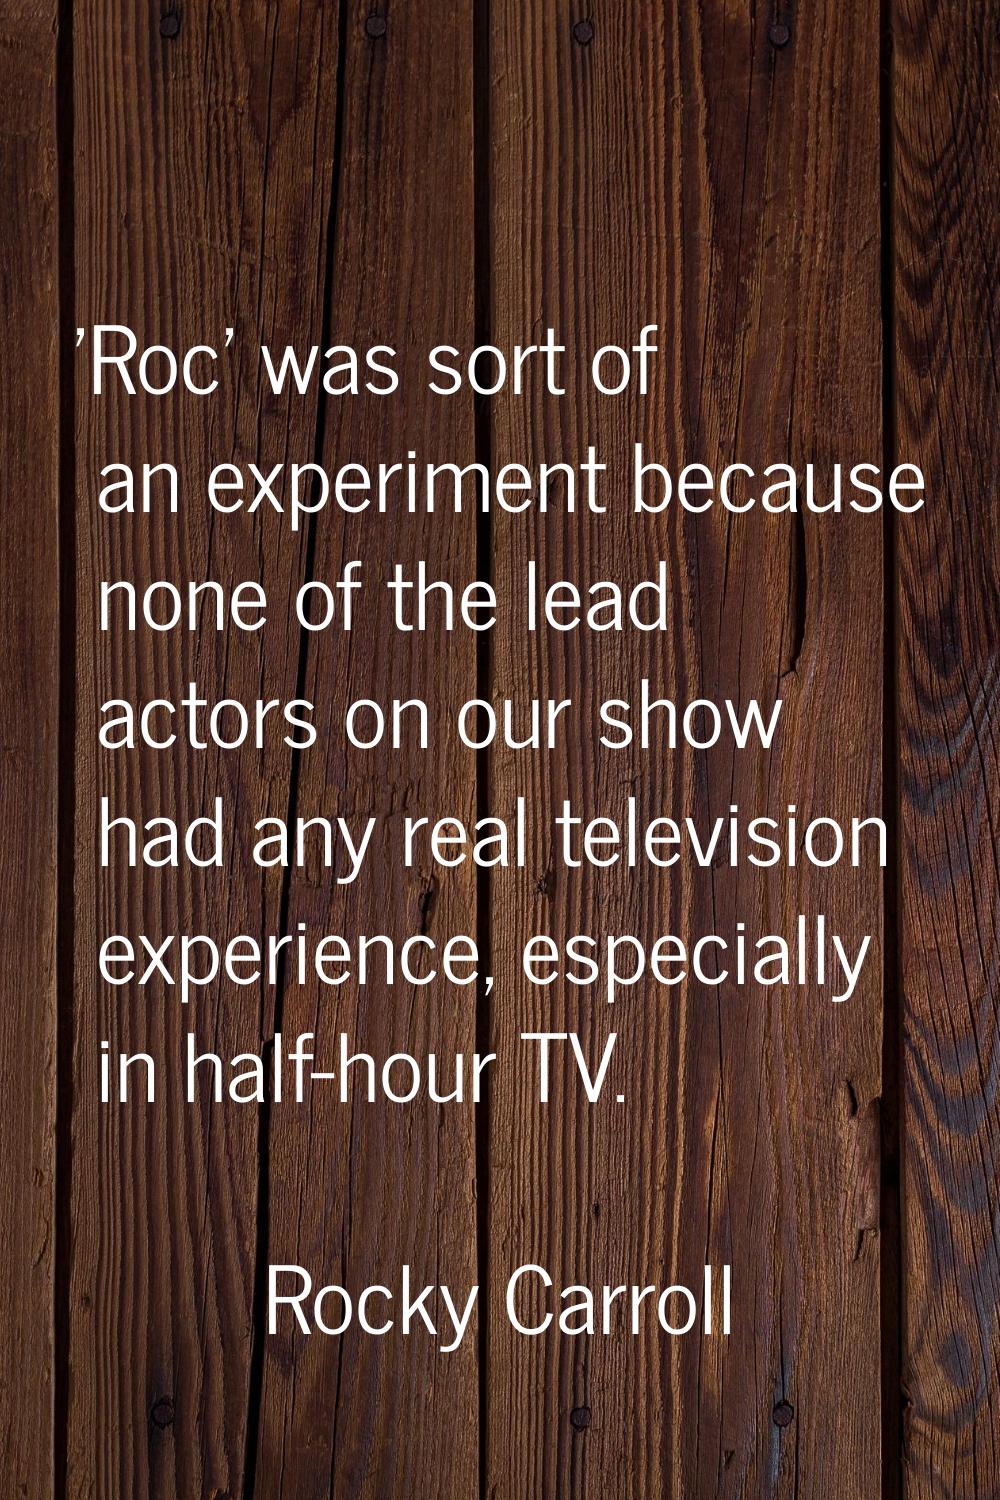 'Roc' was sort of an experiment because none of the lead actors on our show had any real television